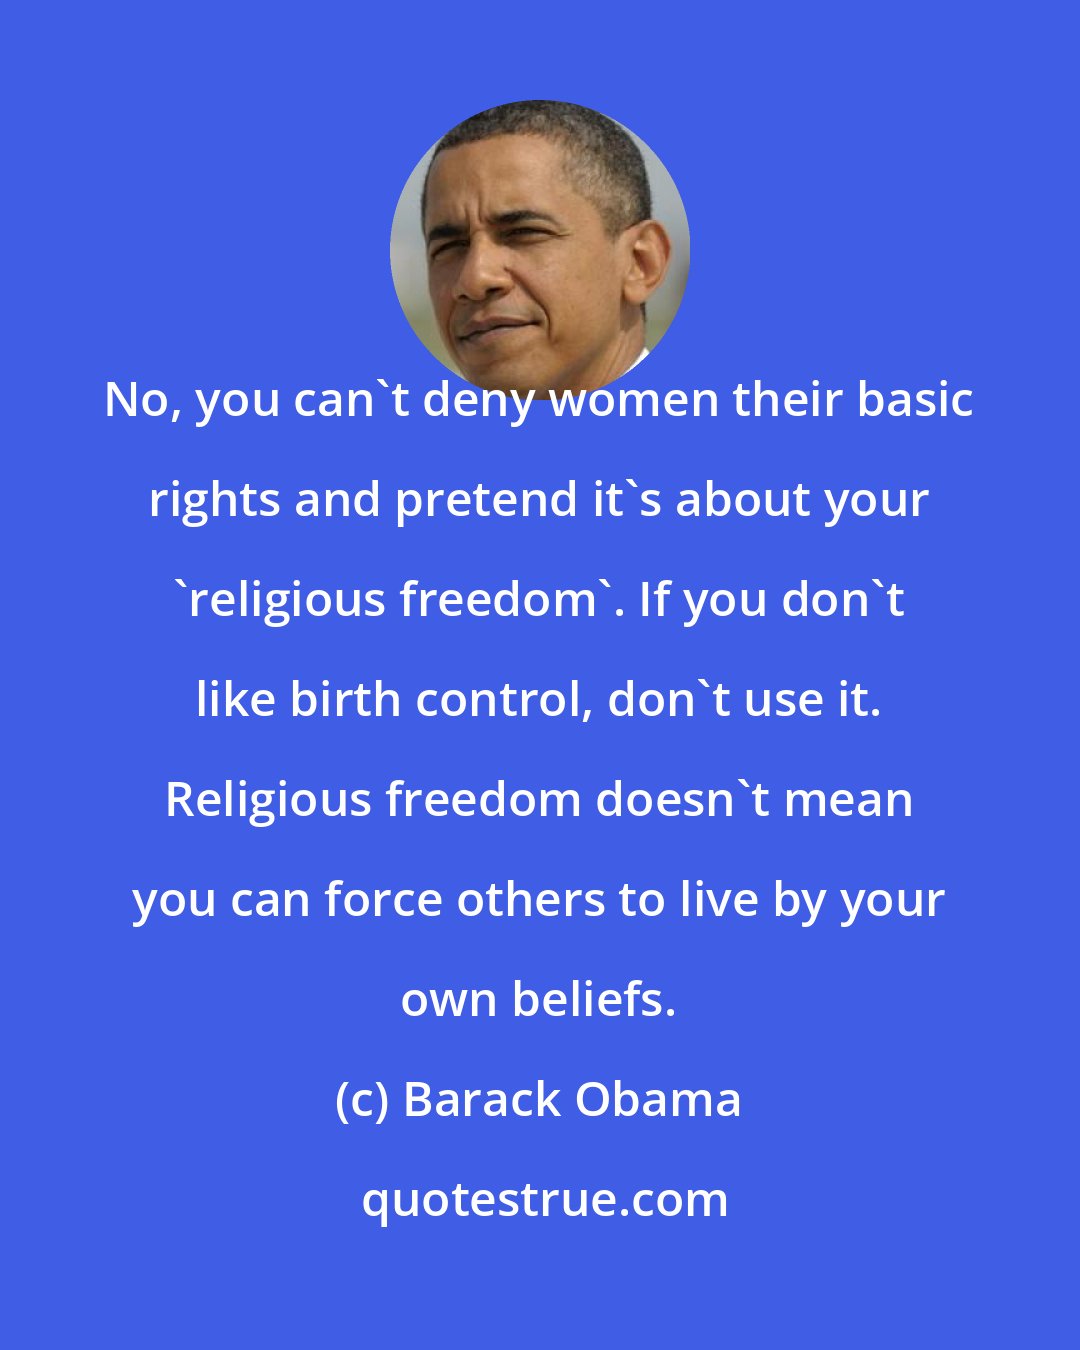 Barack Obama: No, you can't deny women their basic rights and pretend it's about your 'religious freedom'. If you don't like birth control, don't use it. Religious freedom doesn't mean you can force others to live by your own beliefs.